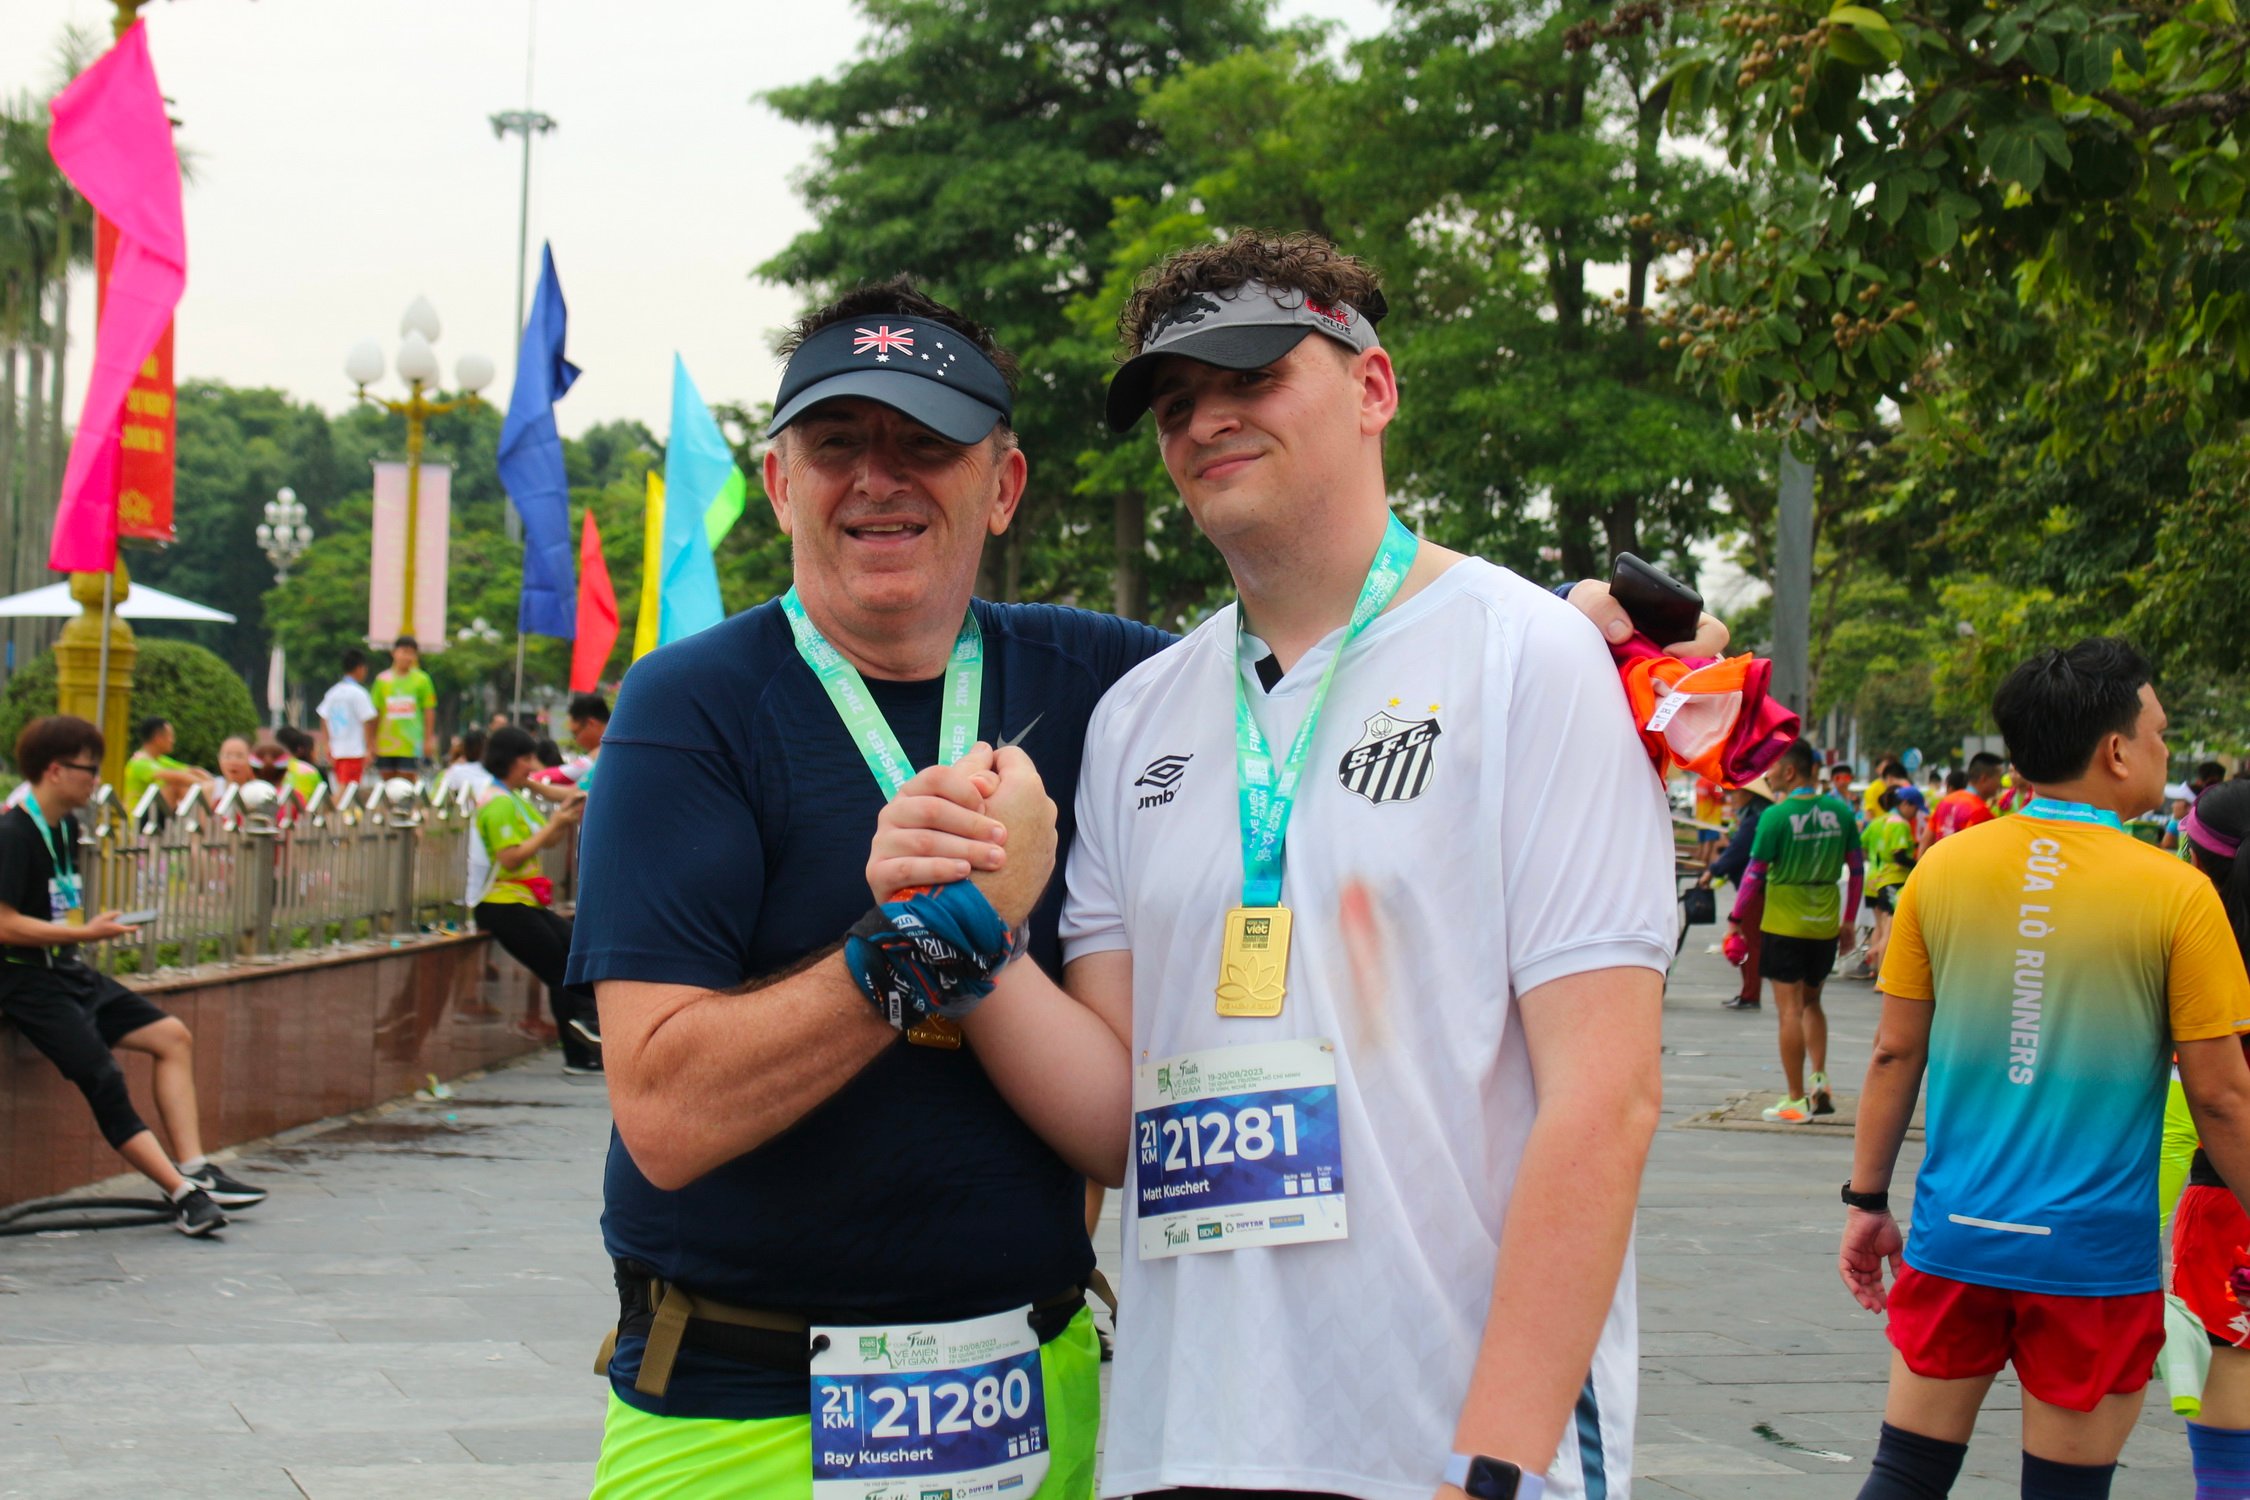 Ray Kuschert (left) and his son Matthew Kuschert pose in this supplied photo after they finished a run in Vinh City, Nghe An Province, Vietnam.